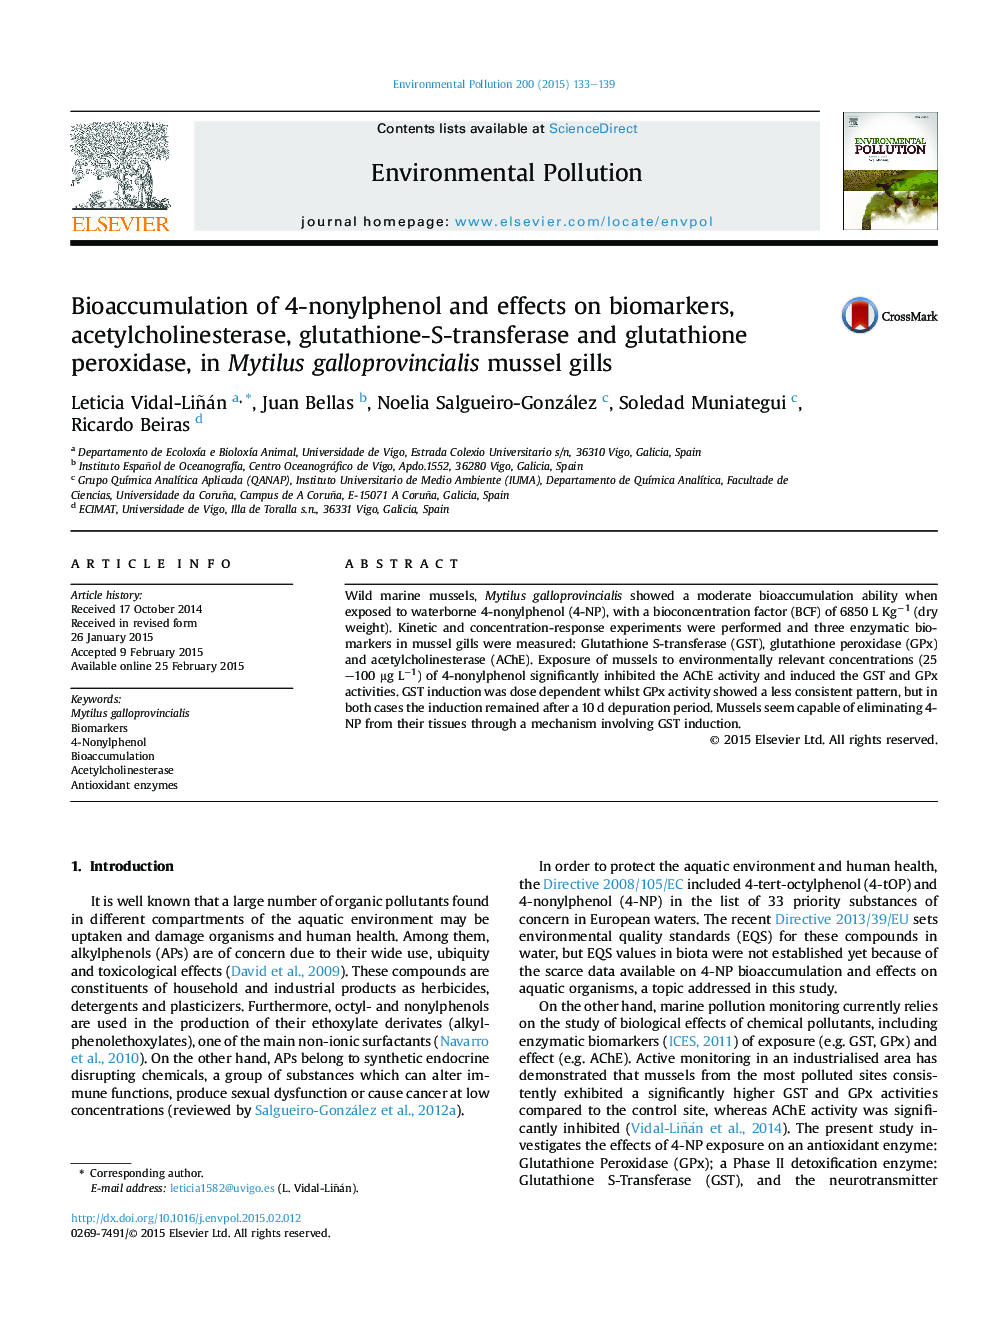 Bioaccumulation of 4-nonylphenol and effects on biomarkers, acetylcholinesterase, glutathione-S-transferase and glutathione peroxidase, in Mytilus galloprovincialis mussel gills